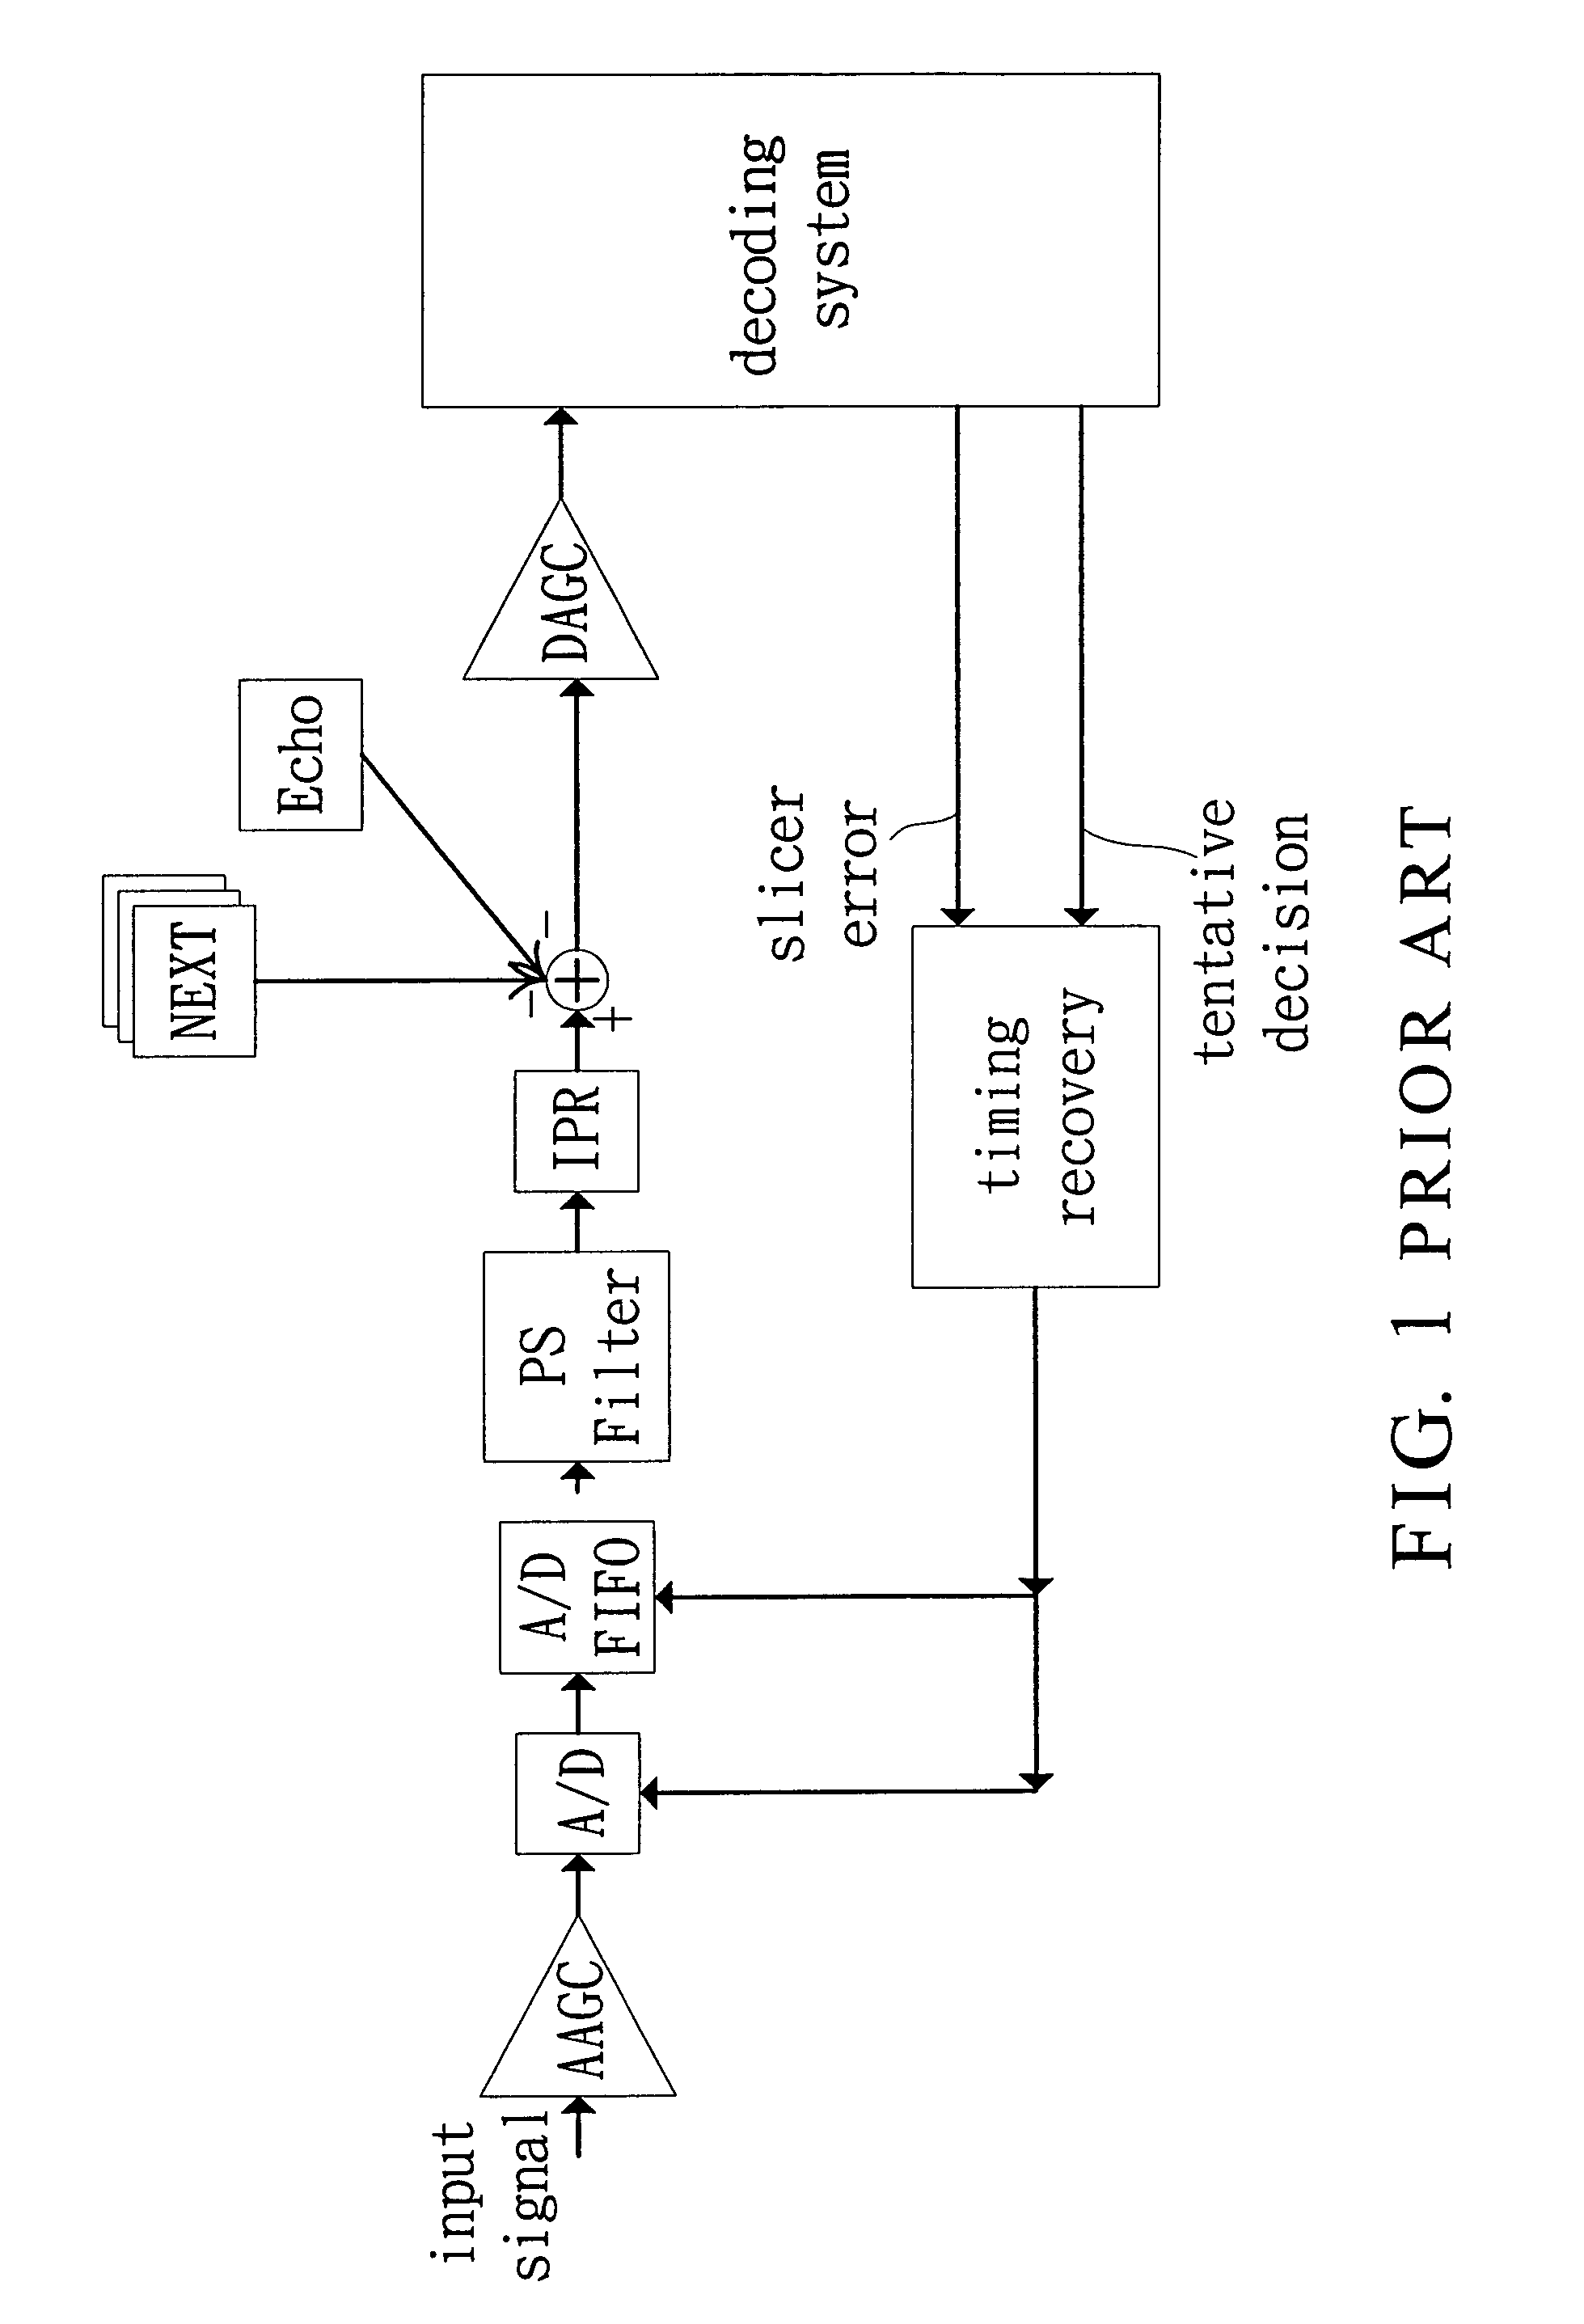 Demodulation apparatus for a network transceiver and method thereof